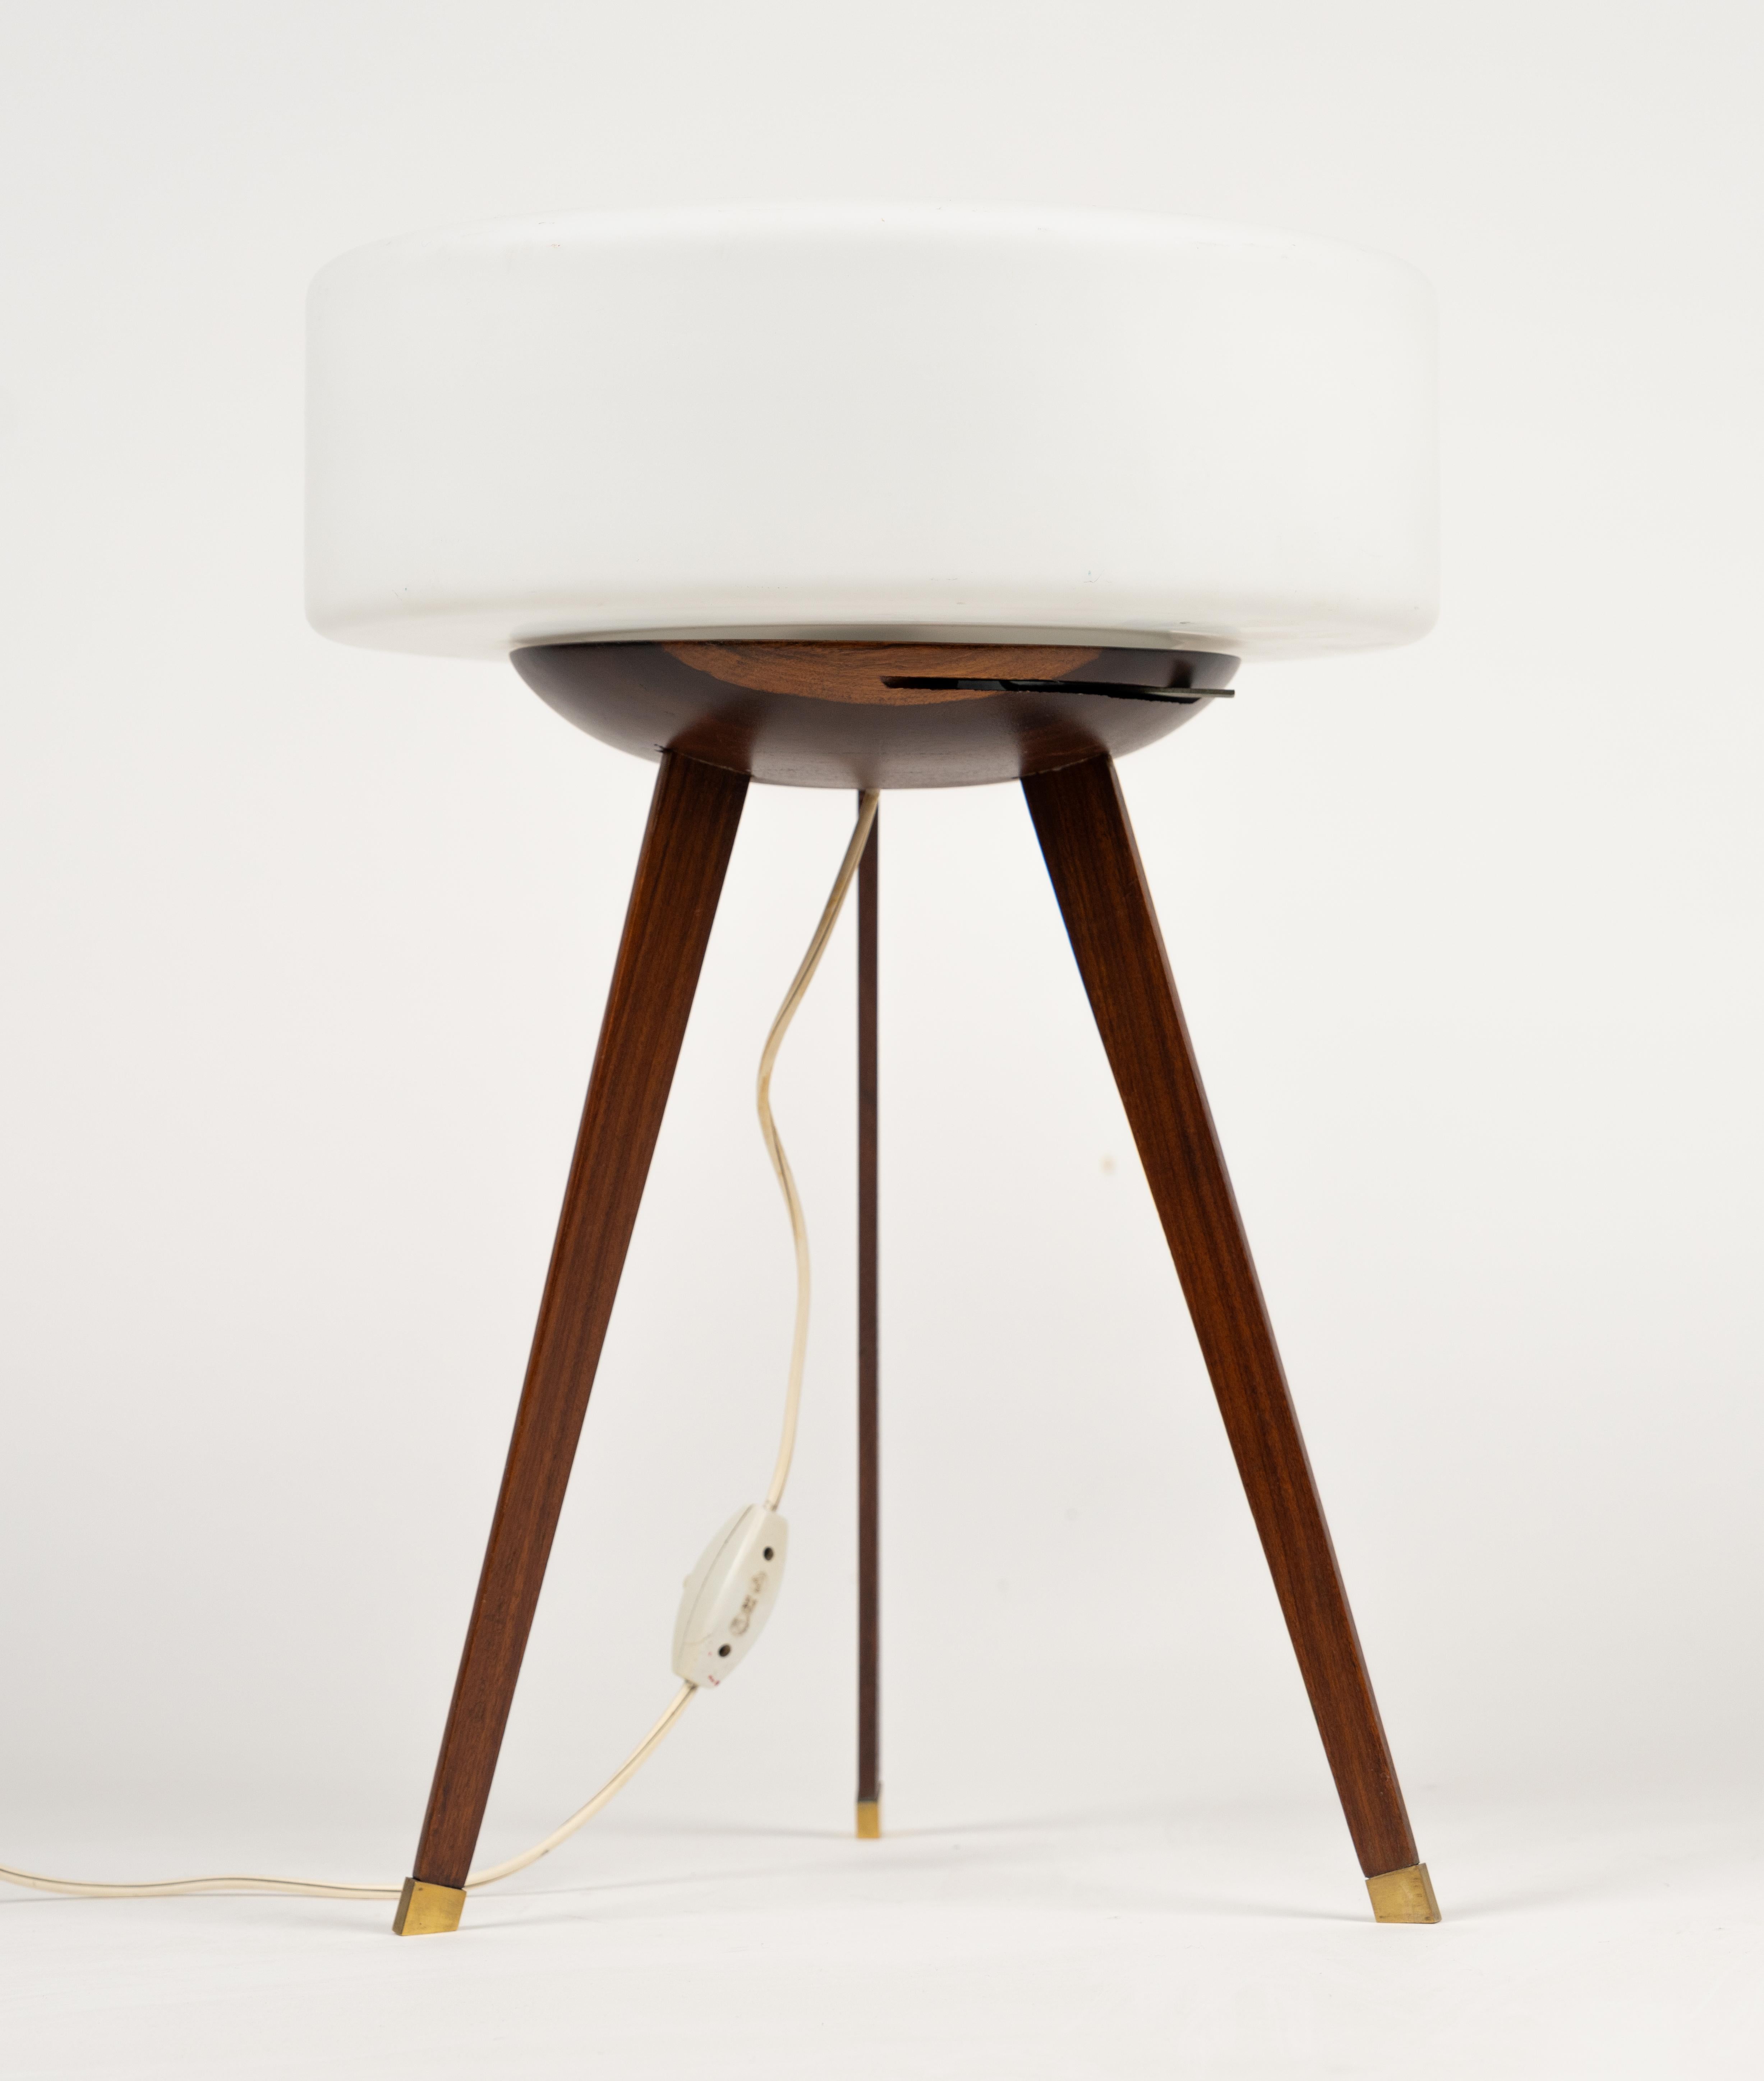 Tripod Table Lamp in Teak, Opaline Glass and Brass Stilnovo Style, Italy 1960s In Good Condition For Sale In Rome, IT